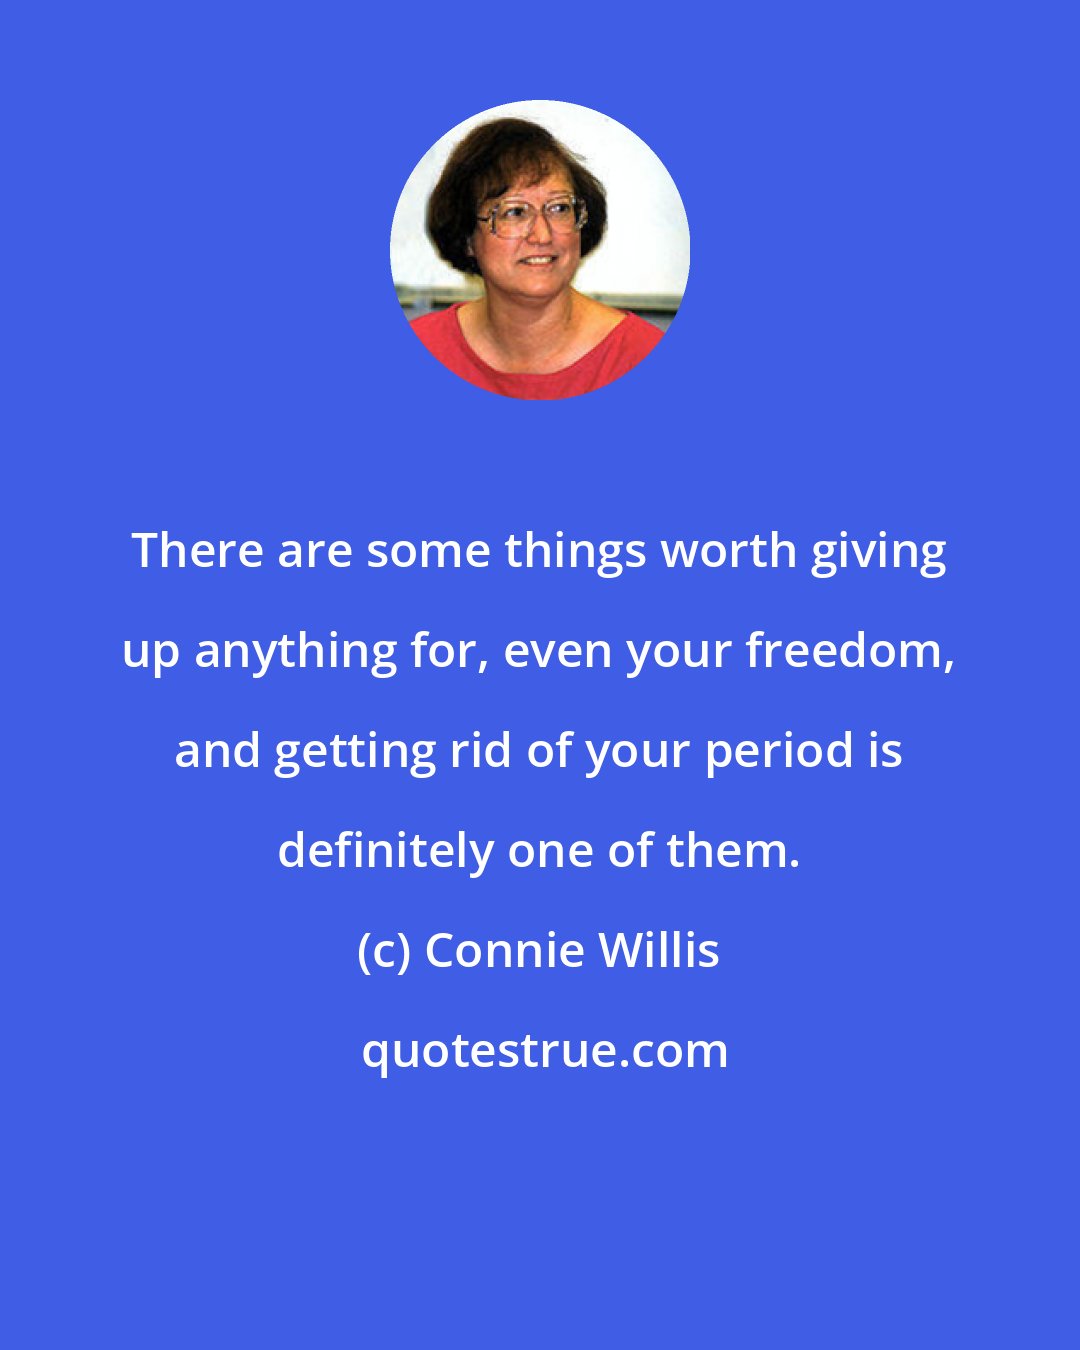 Connie Willis: There are some things worth giving up anything for, even your freedom, and getting rid of your period is definitely one of them.